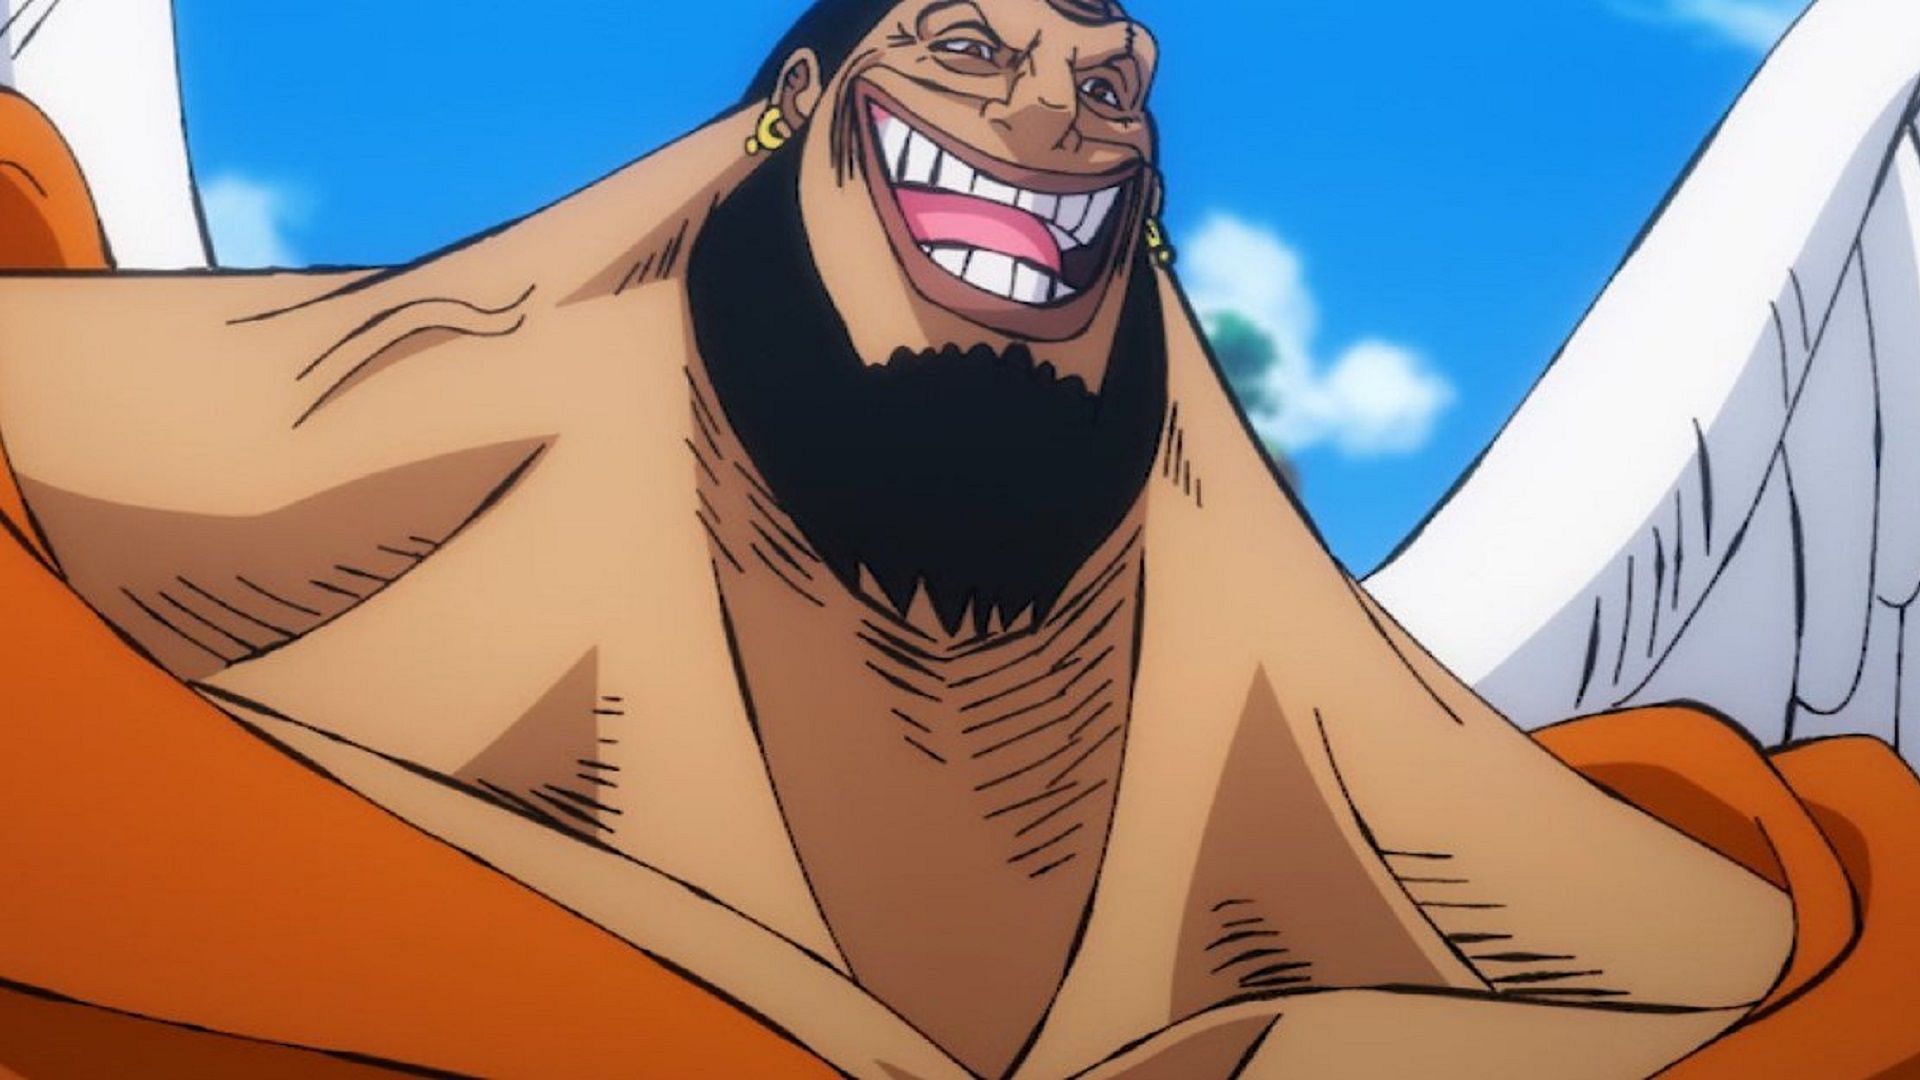 Urouge as seen in One Piece (Image via Toei Animation, One Piece)